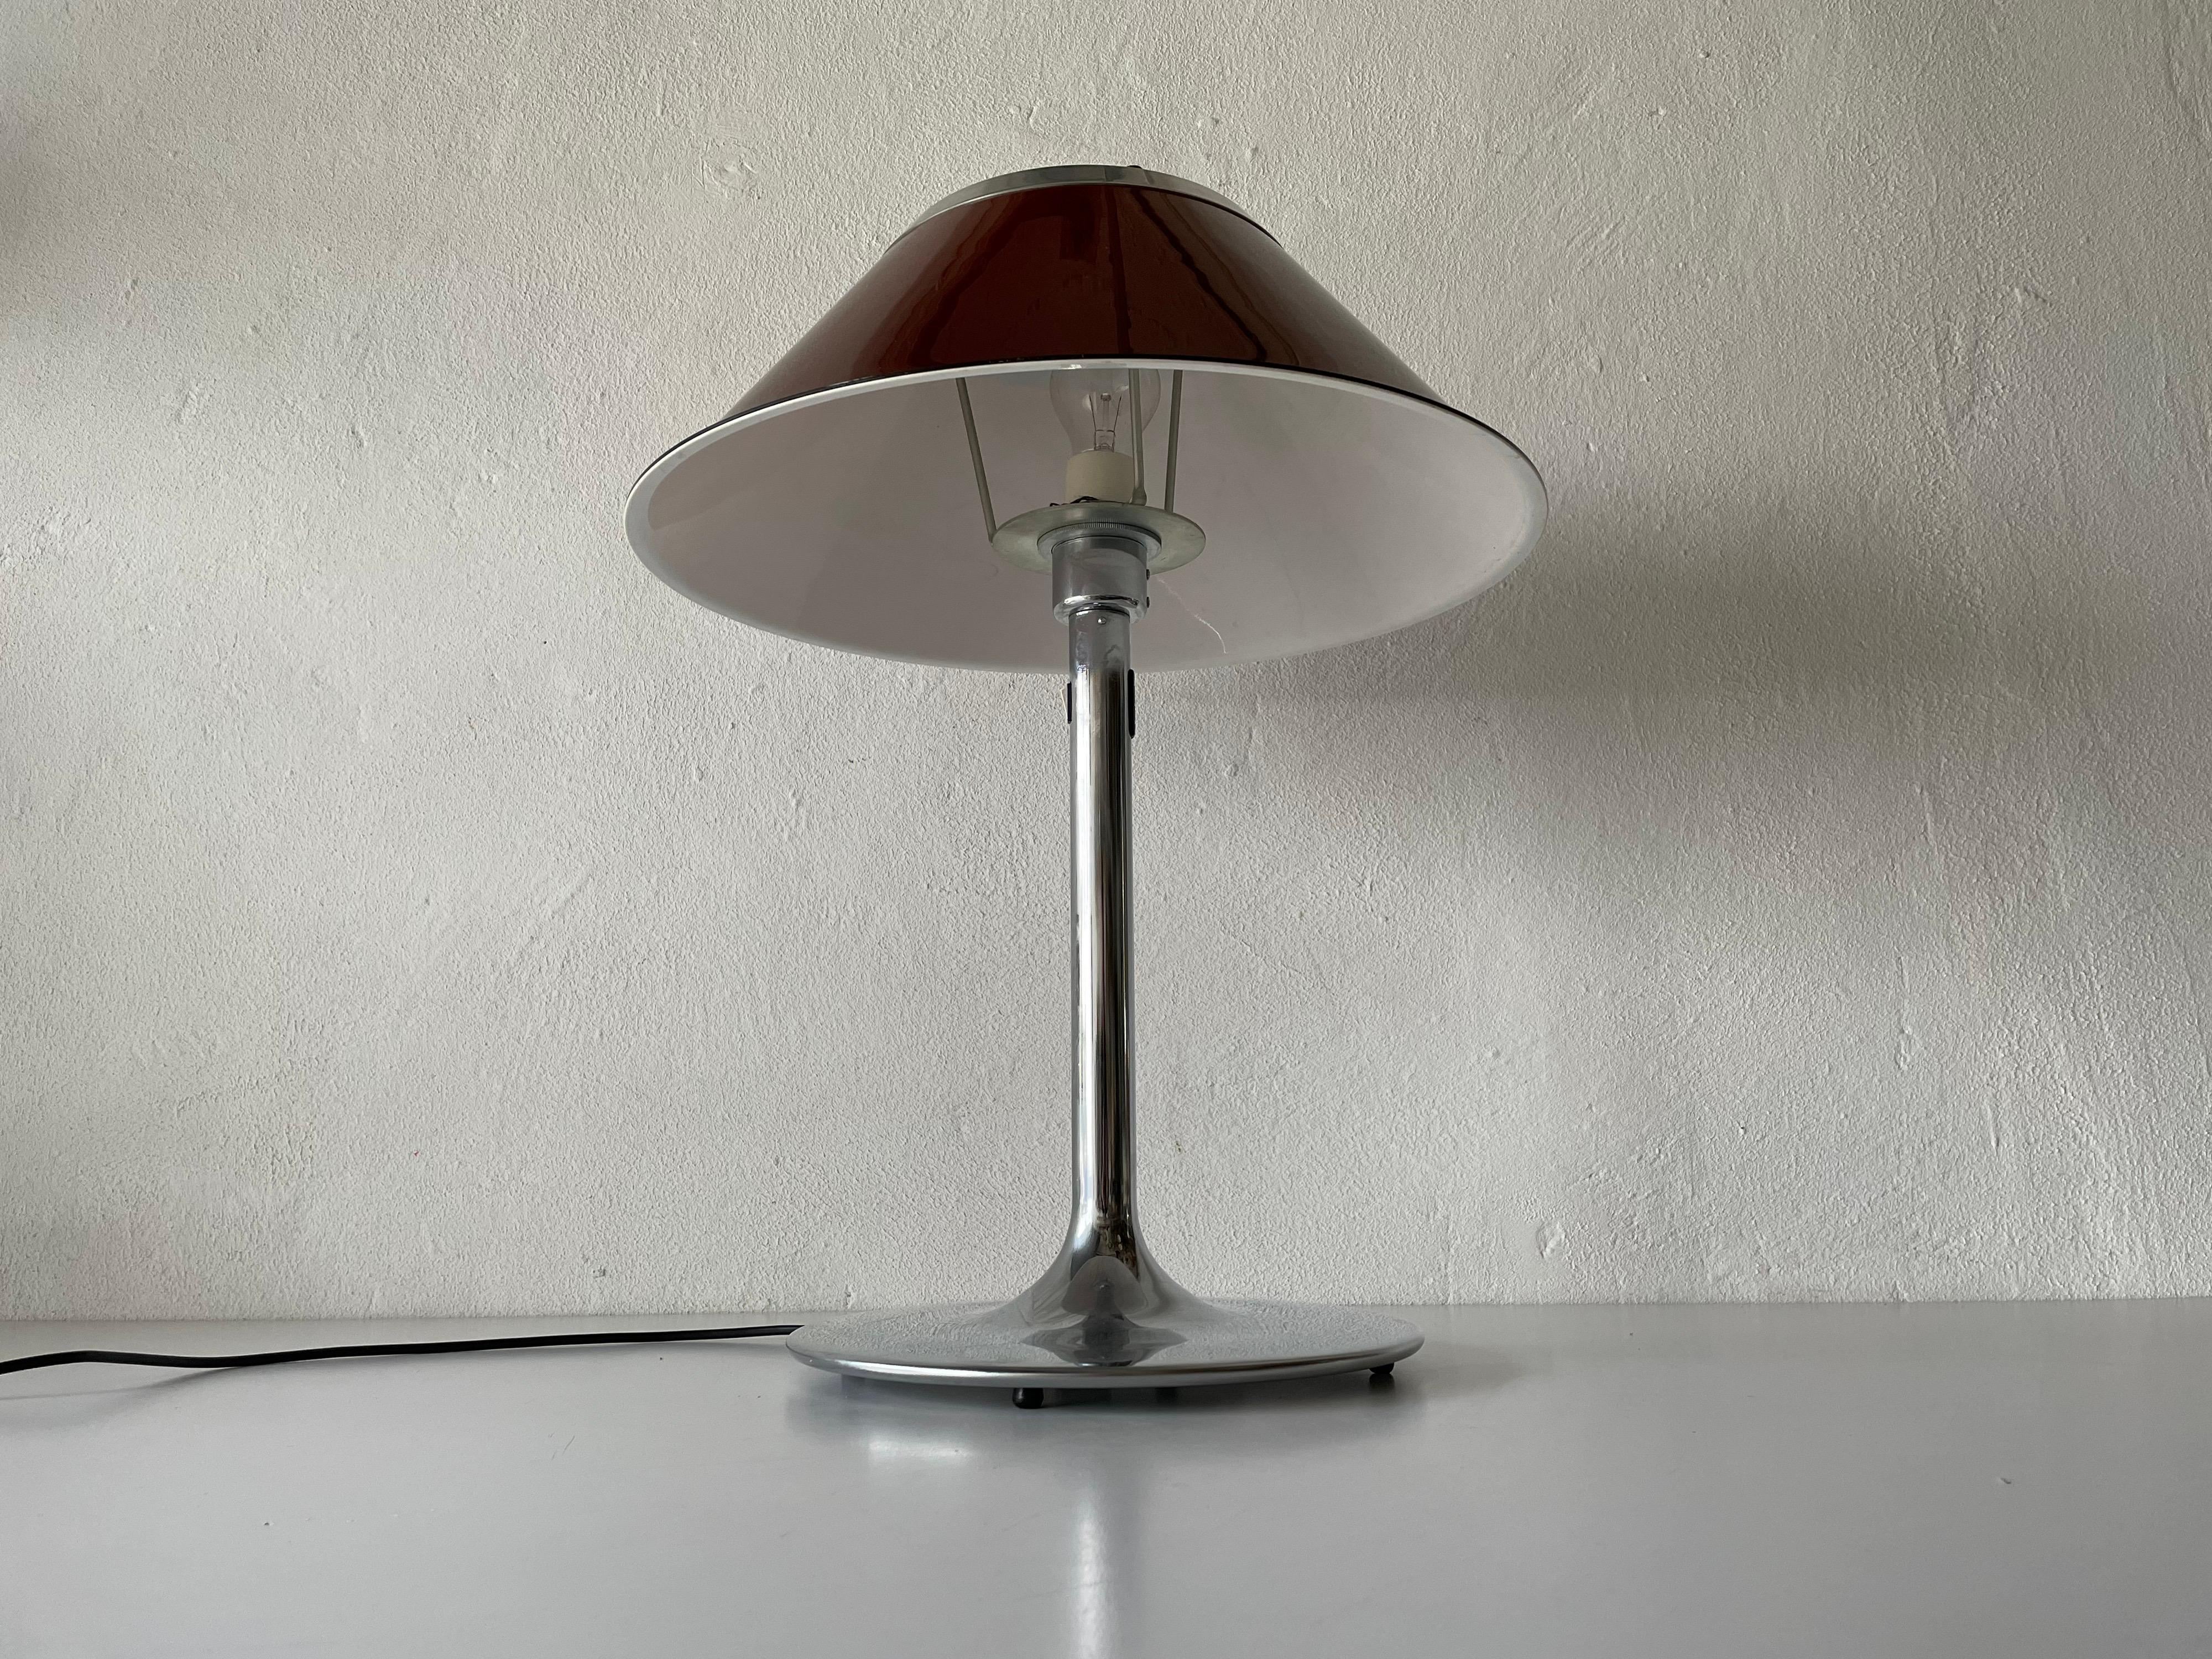 Red metal and chrome table lamp by Ateljé Lyktan, 1970s, Sweden

Lampshade is in very good vintage condition.

This lamp works with E27 light bulb. 
Wired and suitable to use with 220V and 110V for all countries.

Measurements:
Height: 57